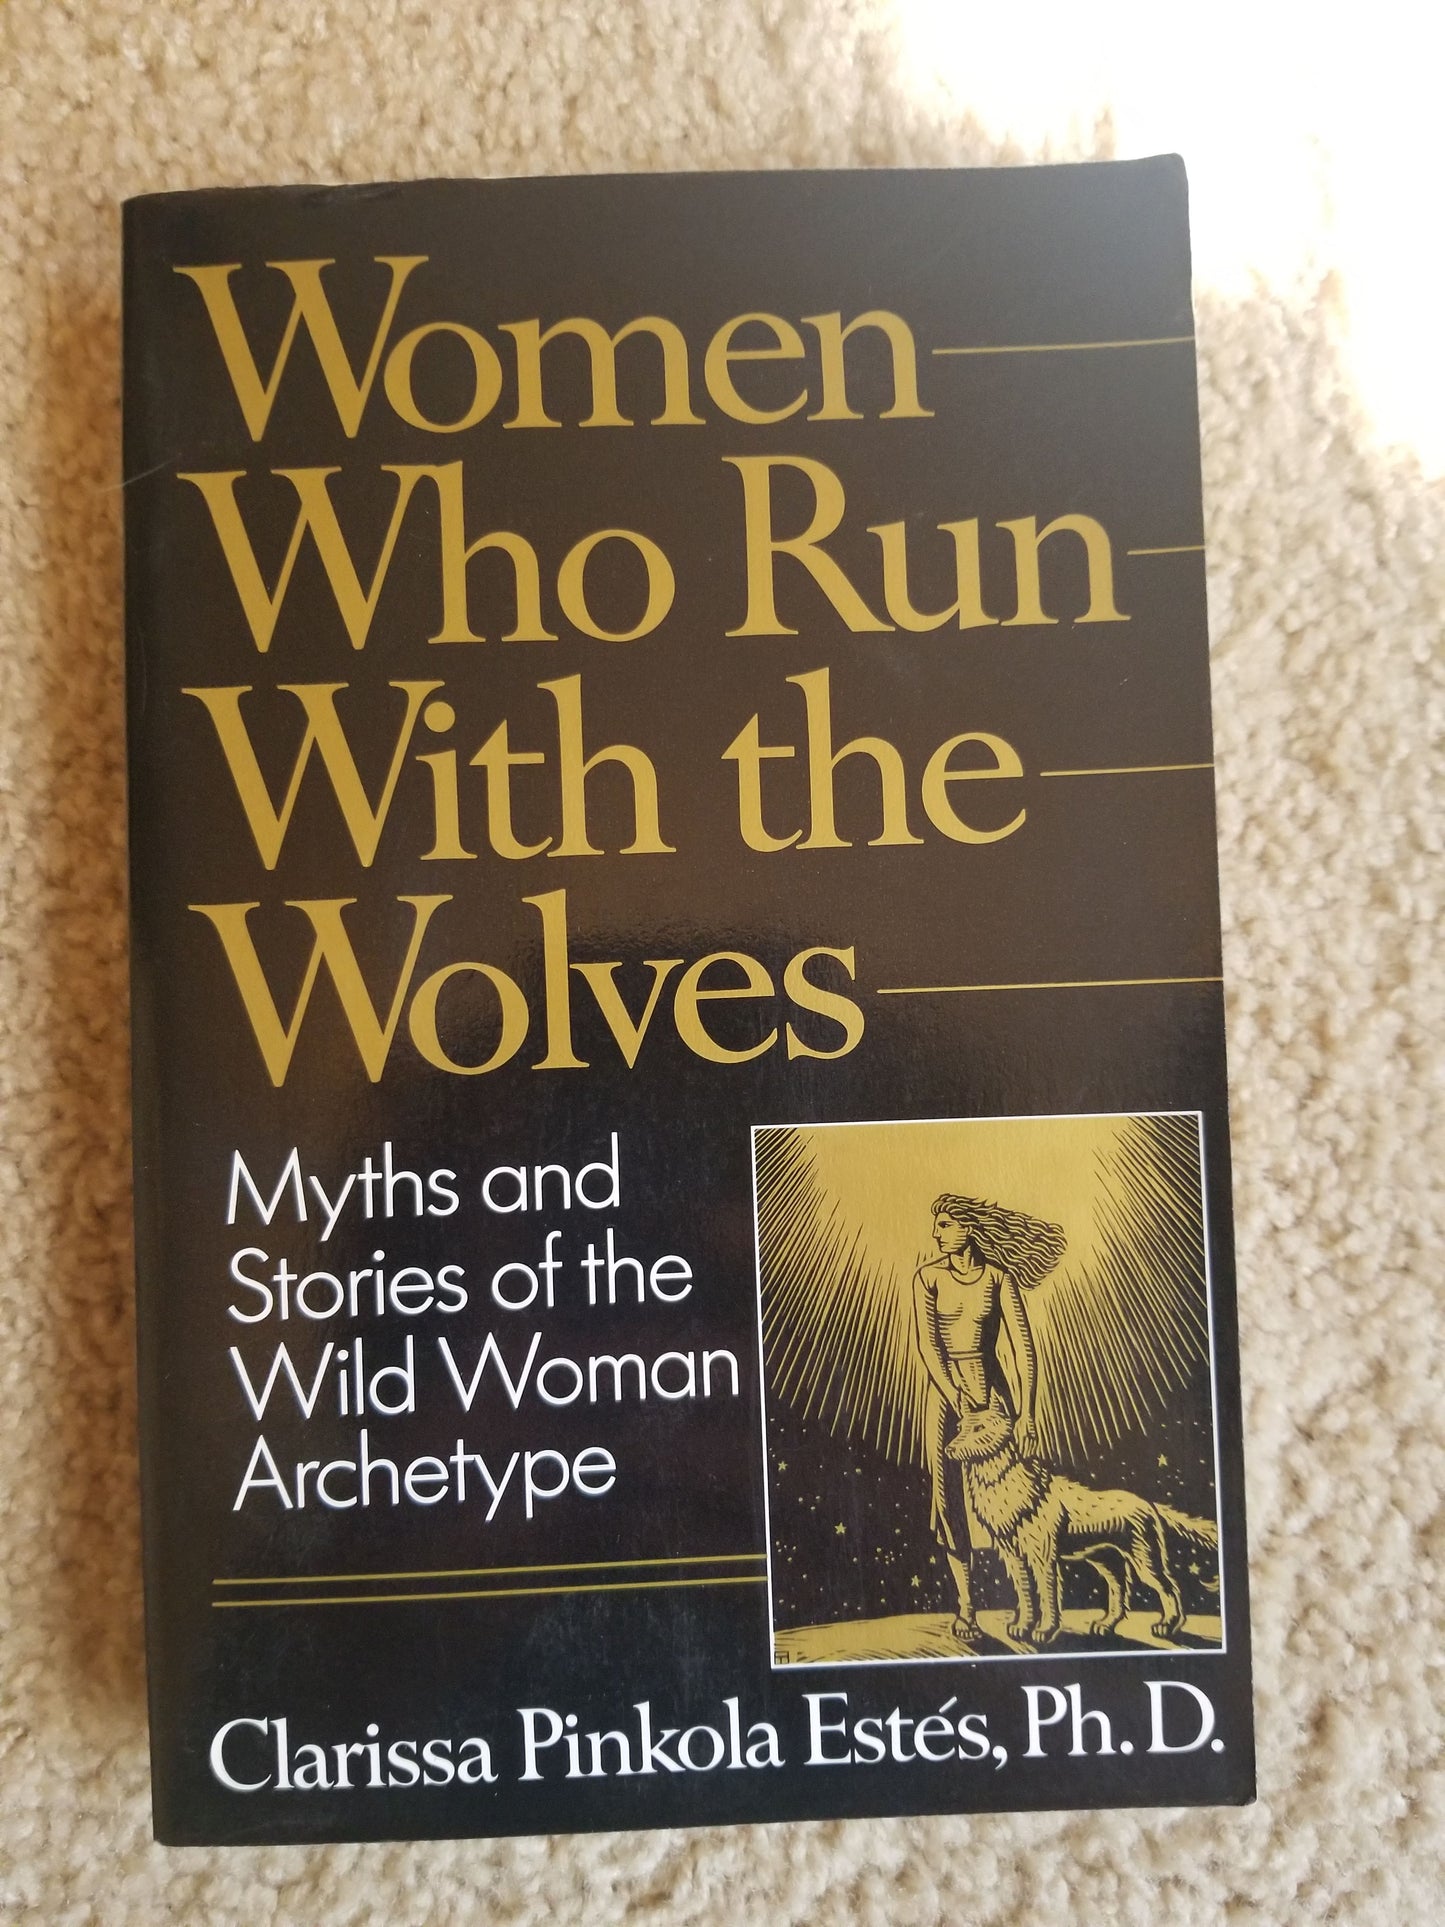 Women Who Run with the Wolves: Myths and Stories of the Wild Woman Archetype (Hardcover) Clarissa Pinkola Estes